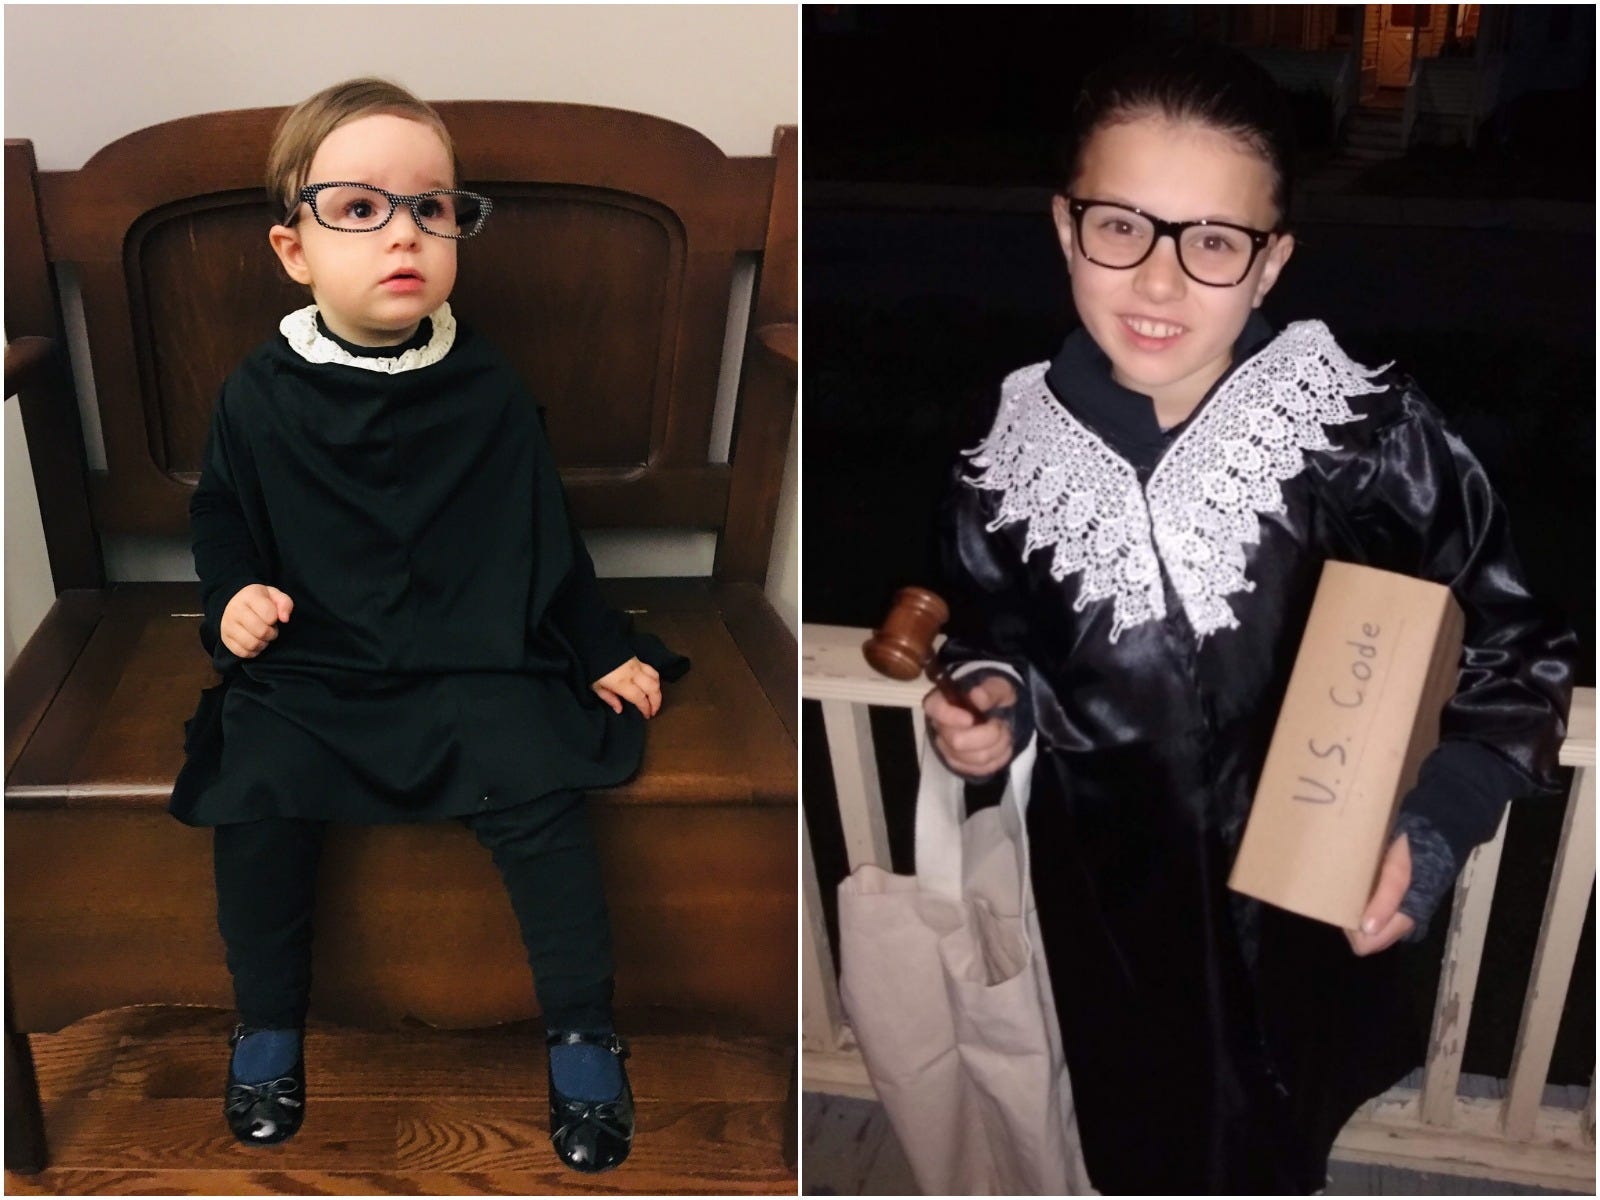 Parents shared touching photos of their daughters dressed as the late Supreme Court Justice.